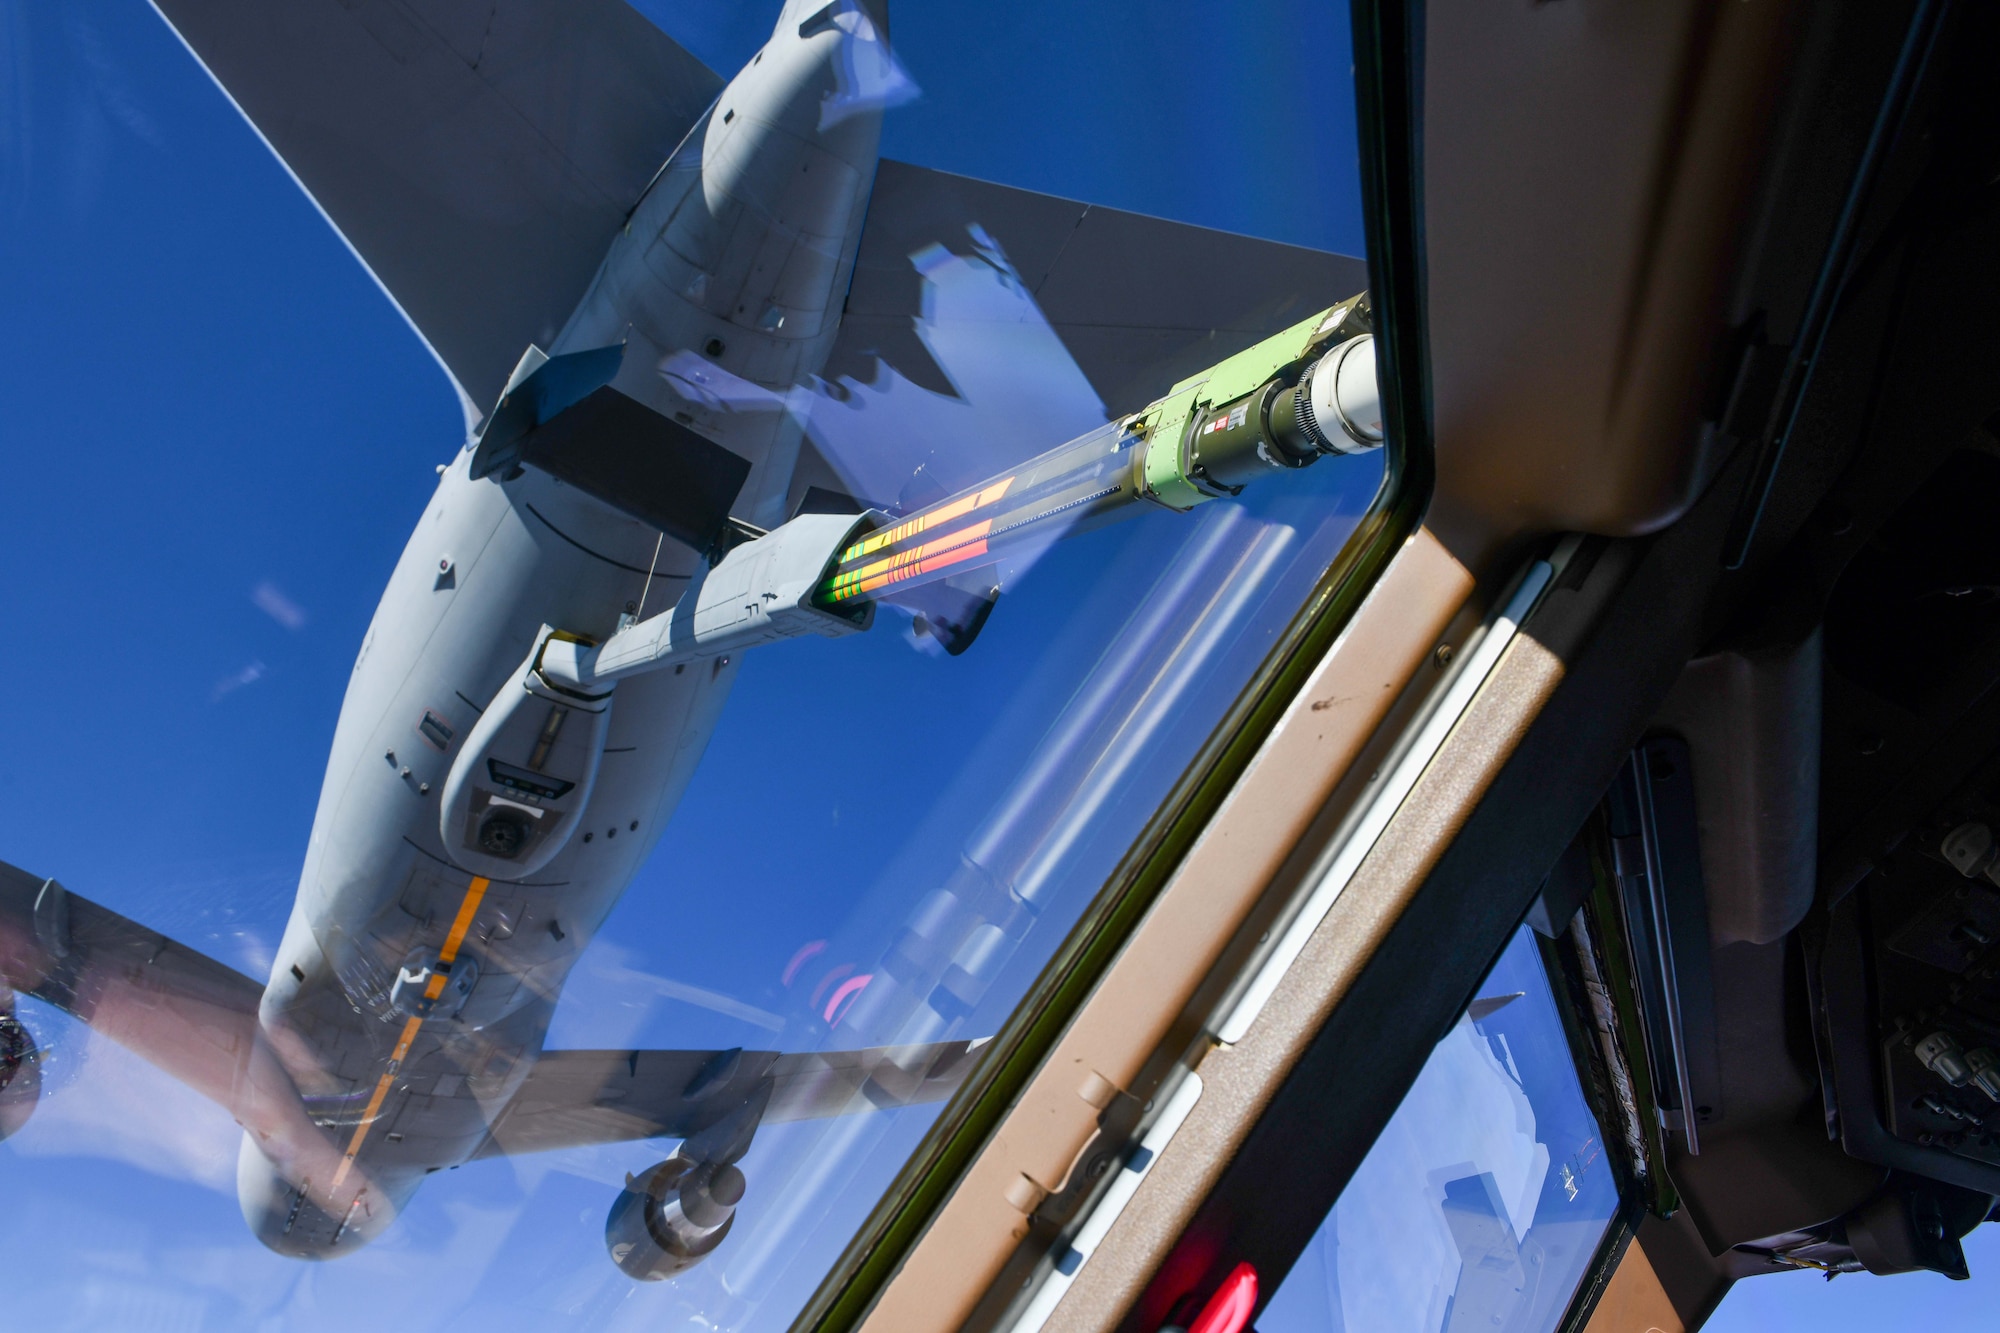 A KC-46 Pegasus from Altus Air Force Base (AFB), Oklahoma, refuels another KC-46 while en route to Travis AFB, Calif., Jan. 20, 2023. The KC-46 Pegasus is equipped with a refueling boom driven by a fly-by-wire control system. (U.S. Air Force photo by Airman 1st Class Miyah Gray)